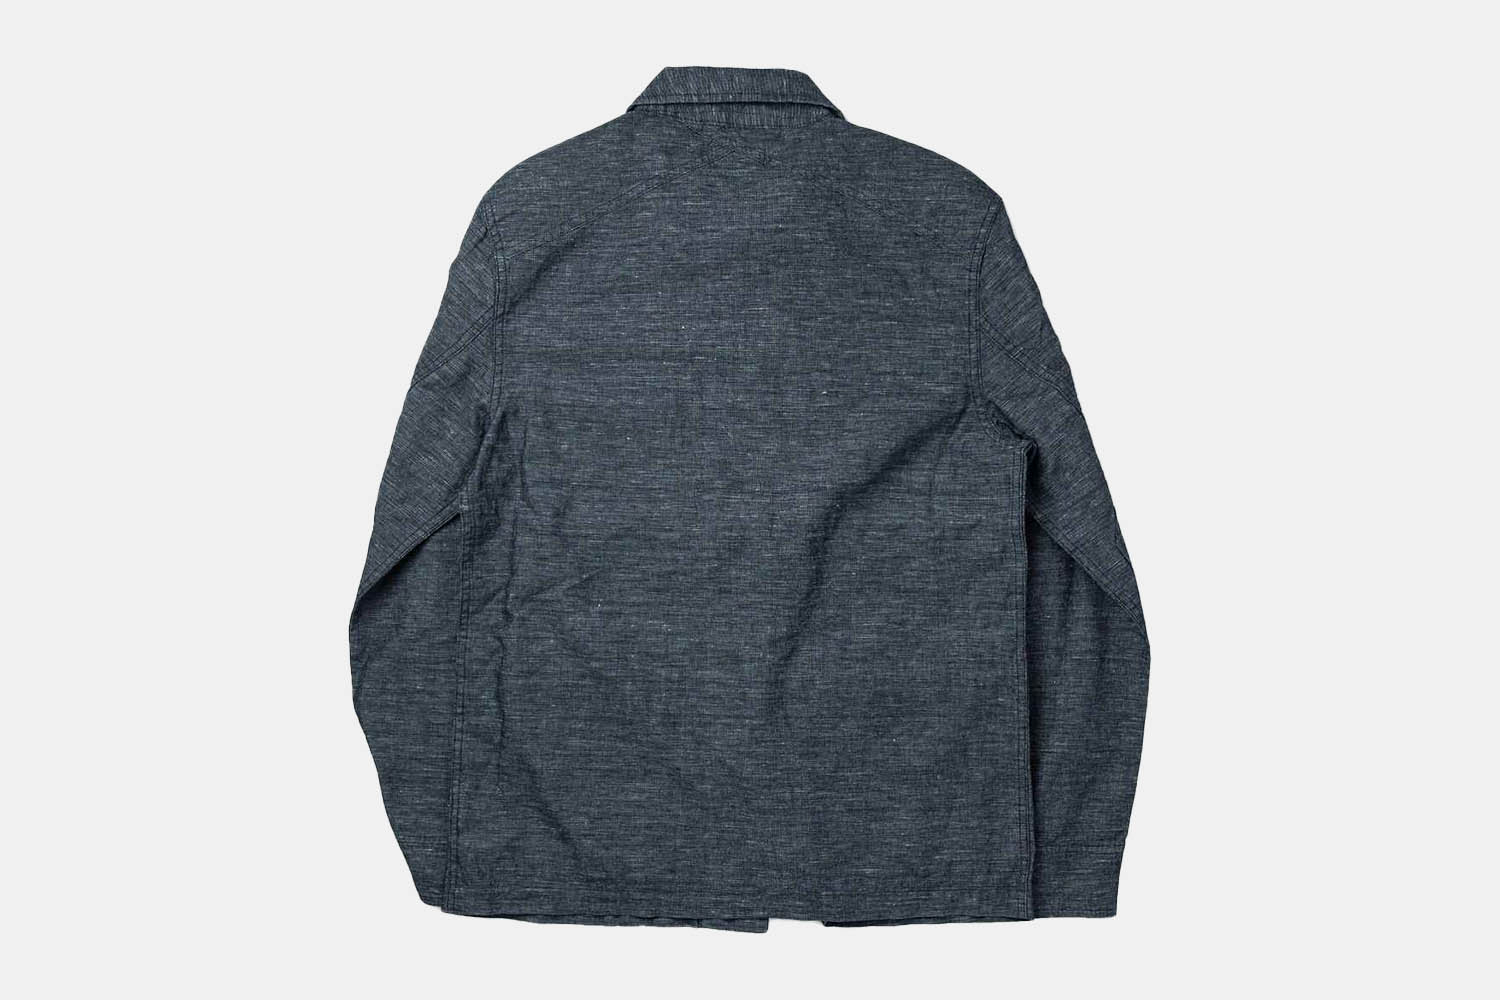 a back shot of the TS shirt jacket in navy.